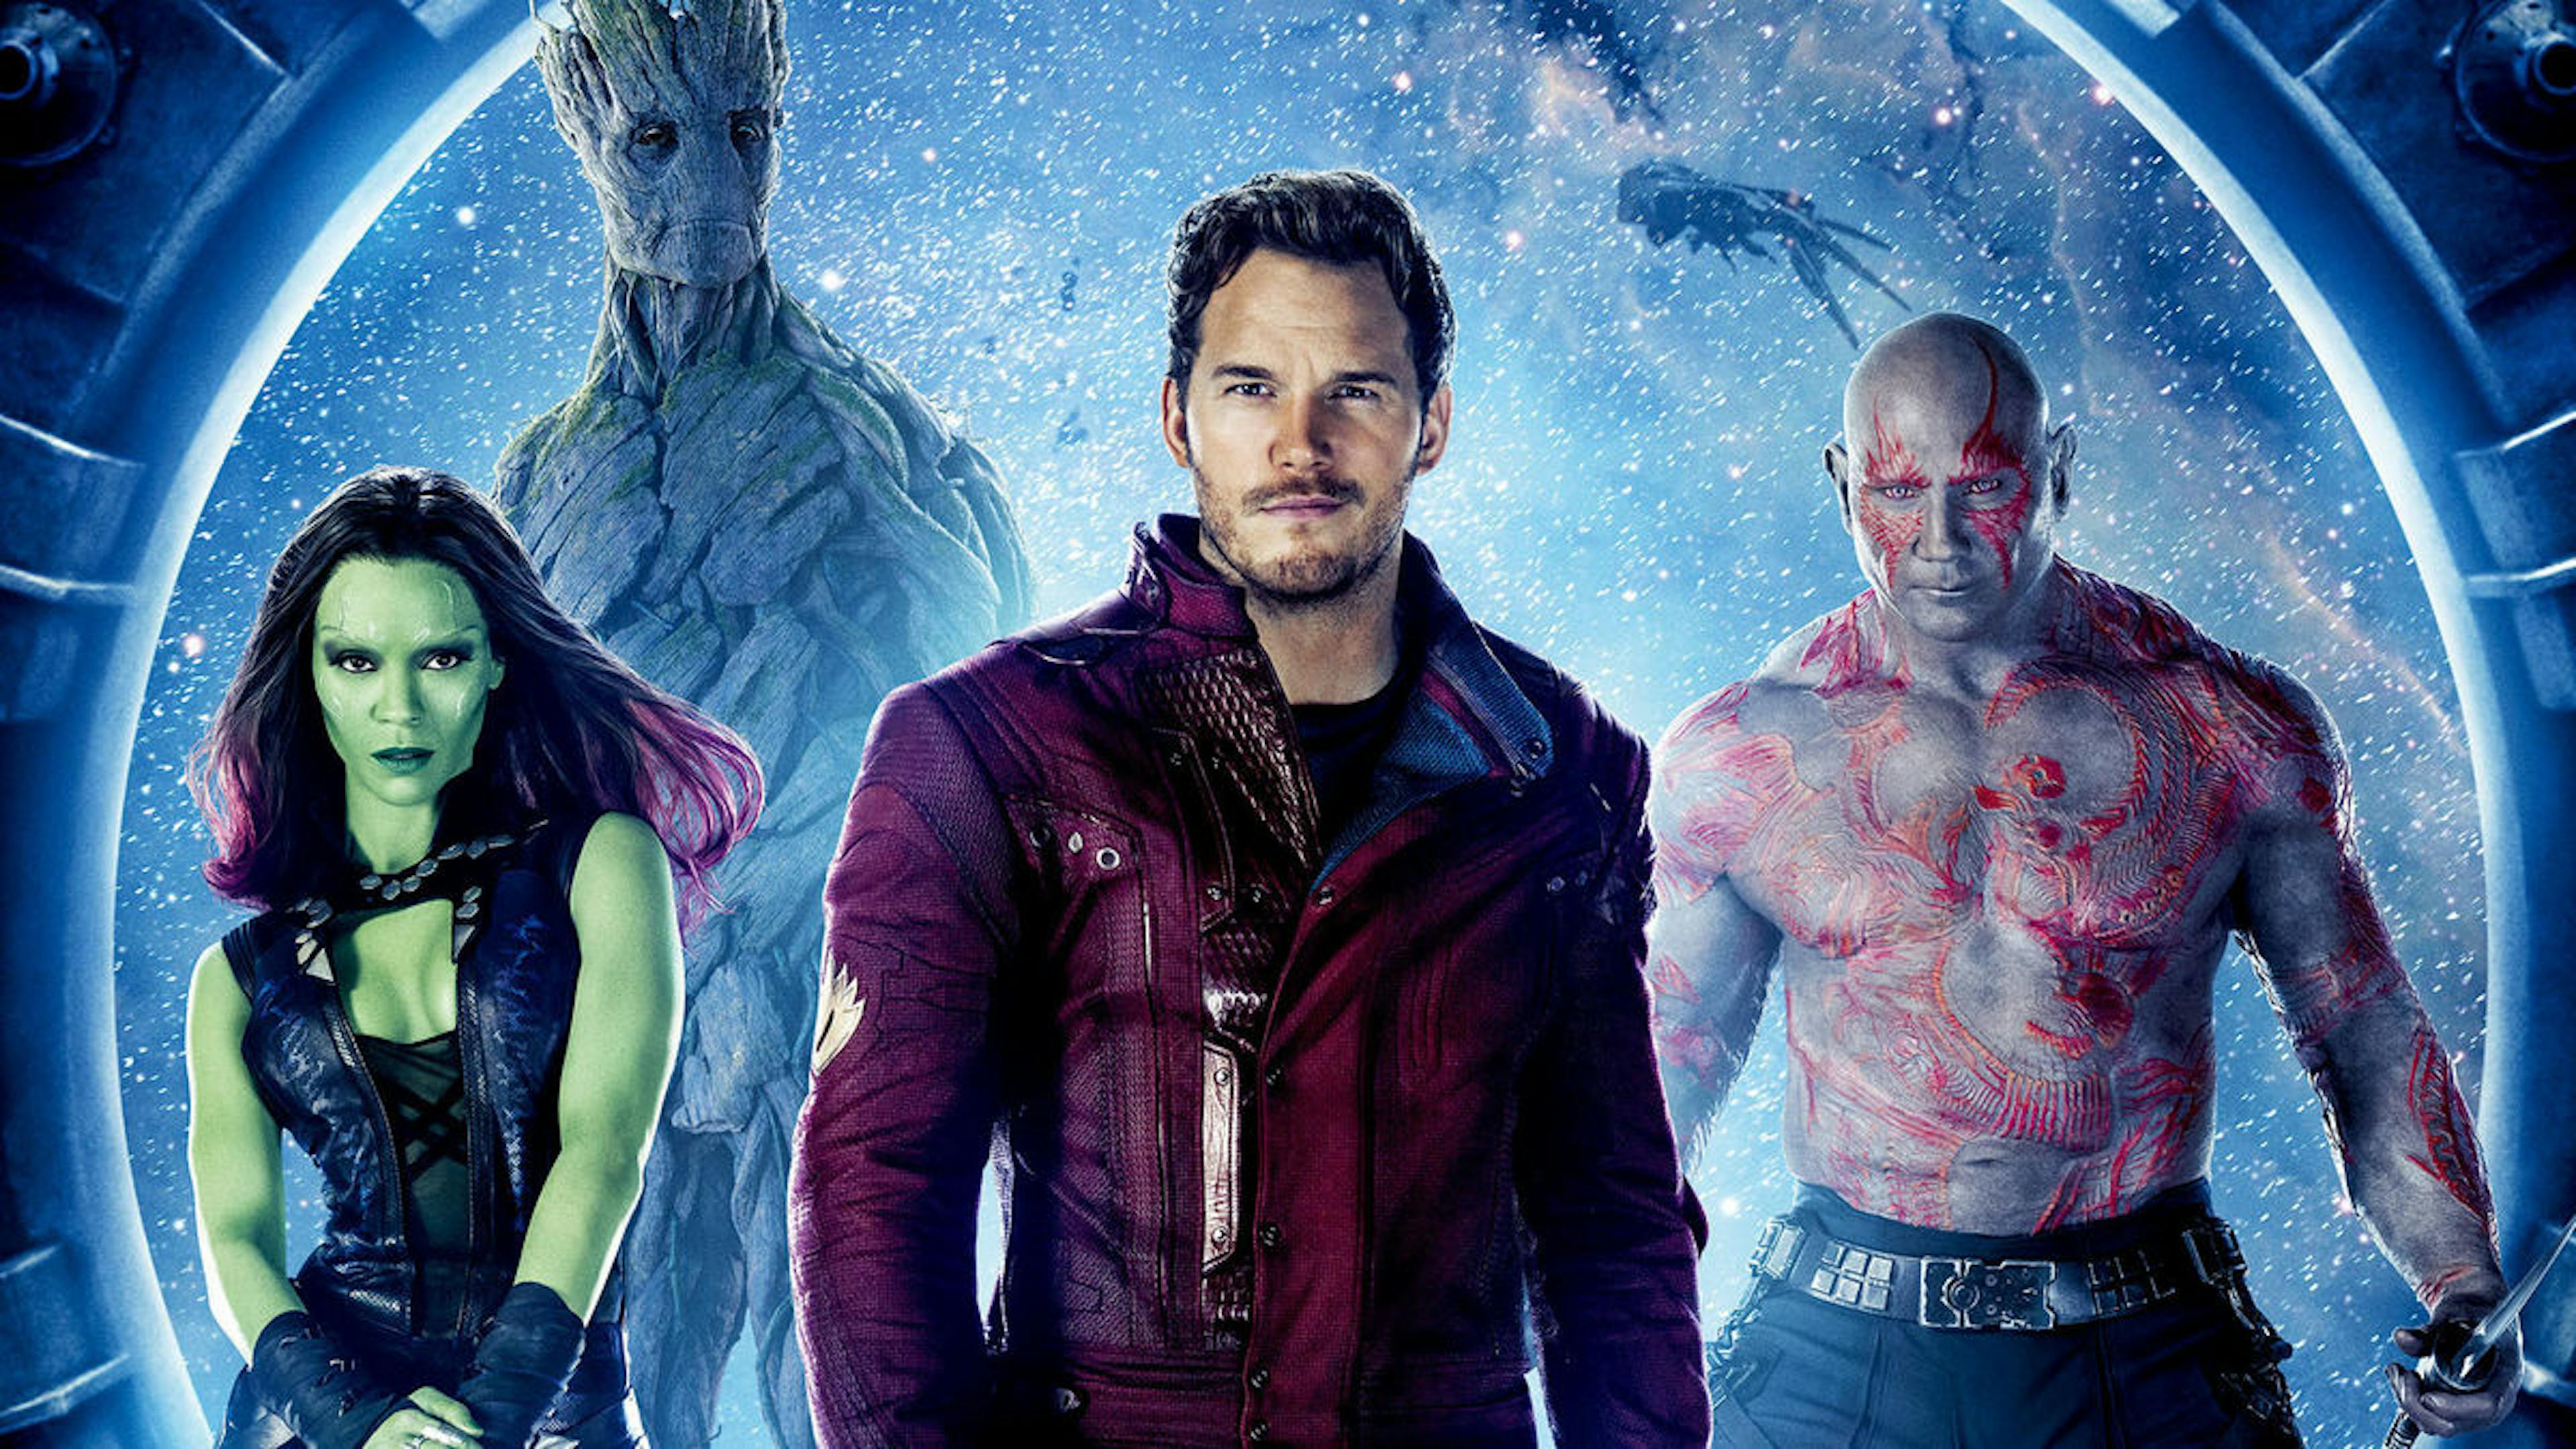 https://letterboxd.com/film/guardians-of-the-galaxy/